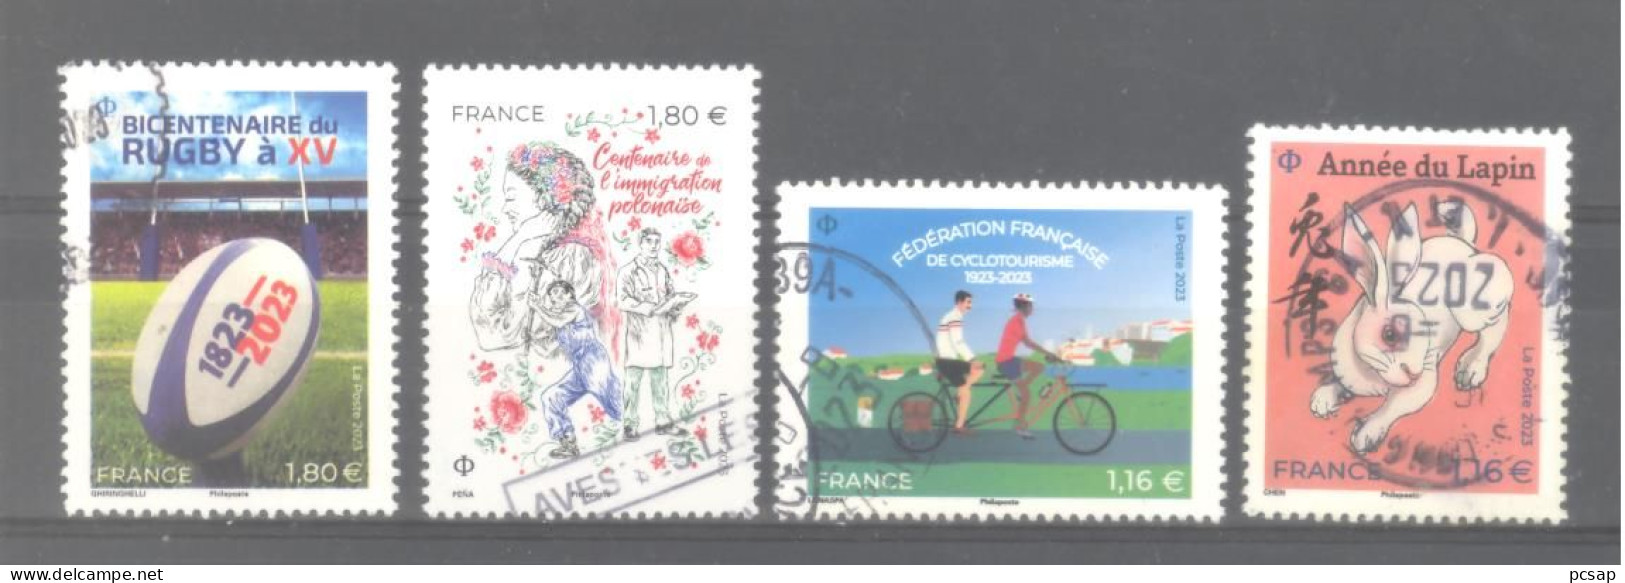 France Oblitérés : 5707 (Bicenteniare Rugby à XV) - 5705 - 5704 & 5646 (cachet Rond) - Used Stamps